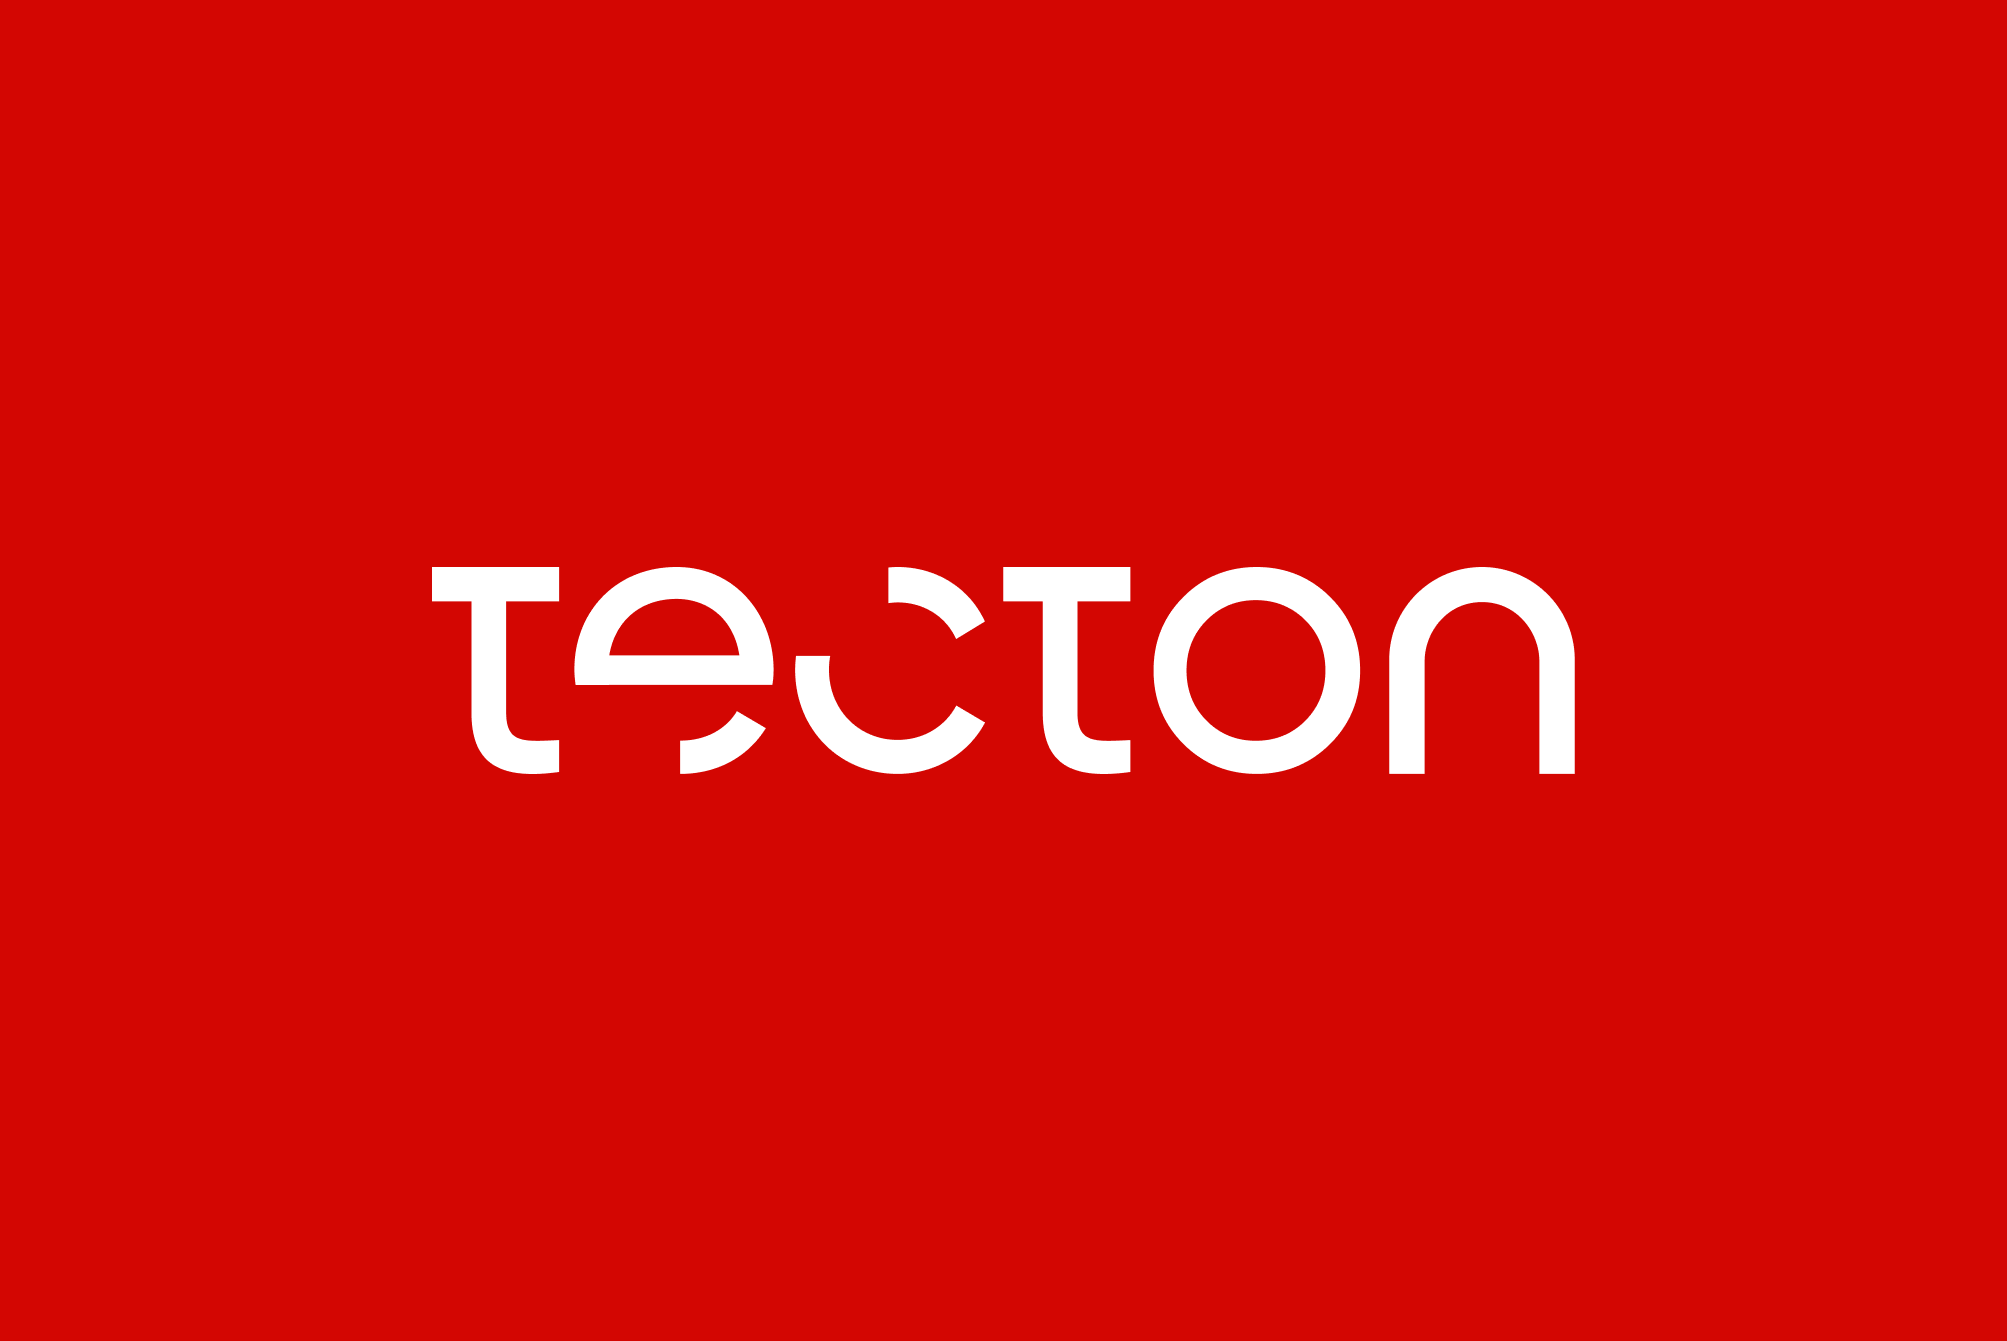 Tecton: Bringing machine learning to the masses